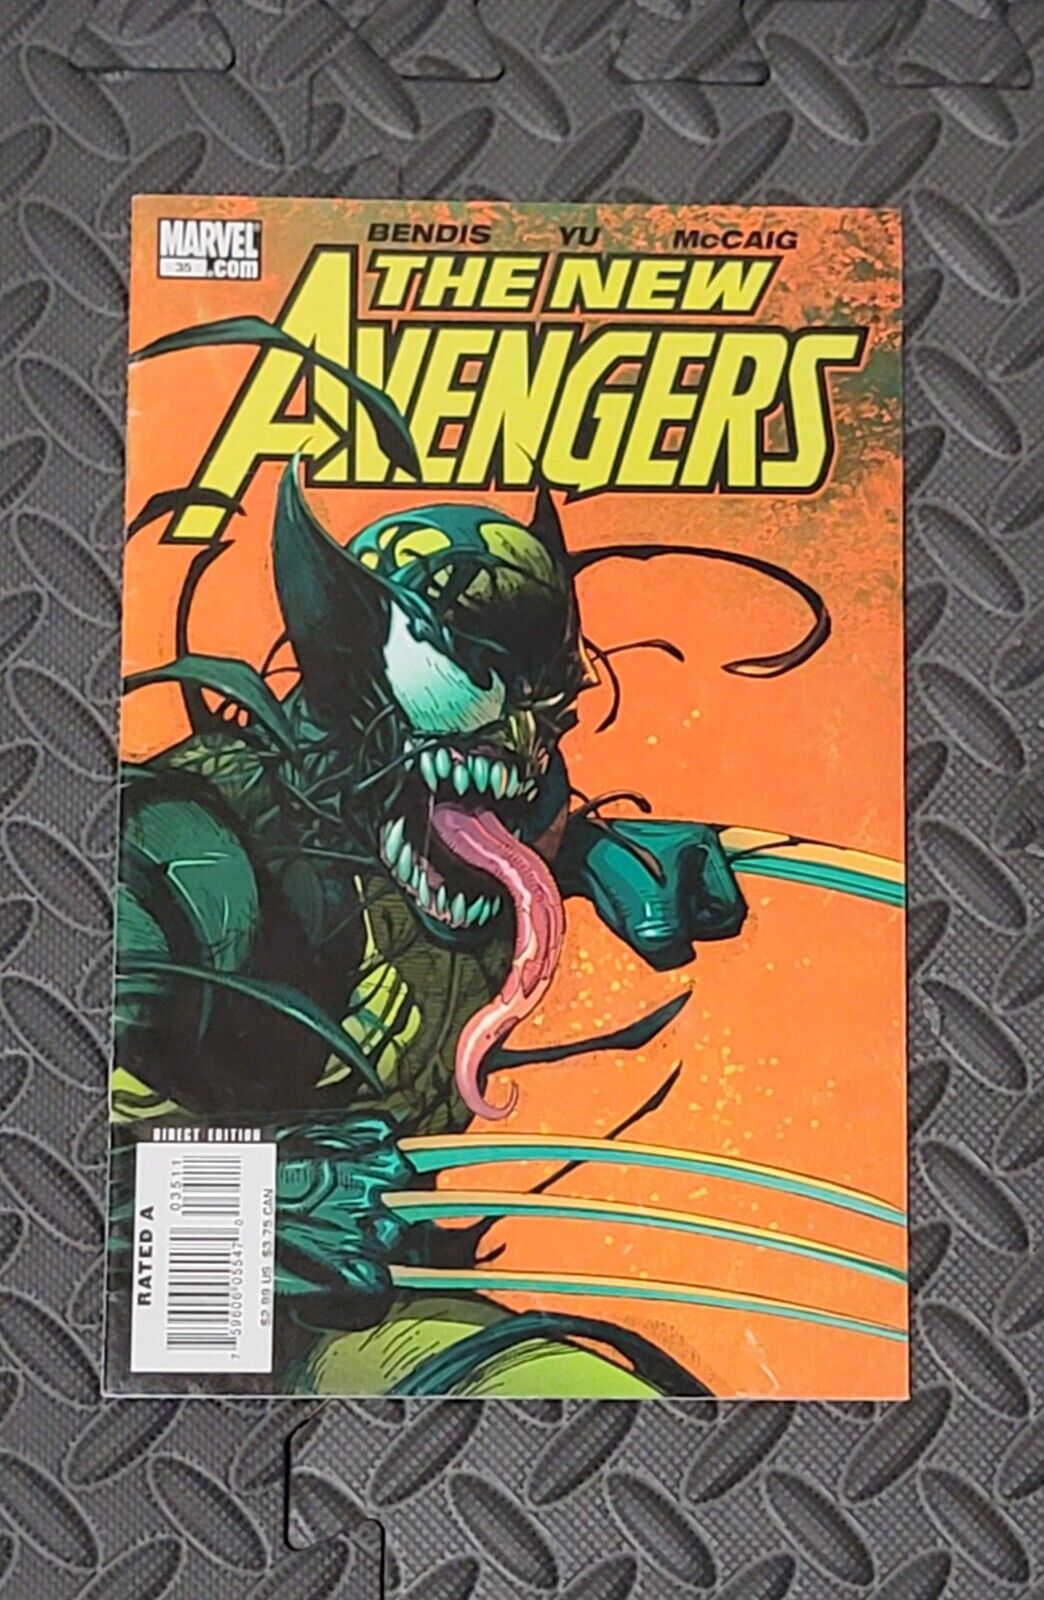 The New Avengers #35 2007 MARVEL Early Venomized Wolverine Cover Art VF/NM